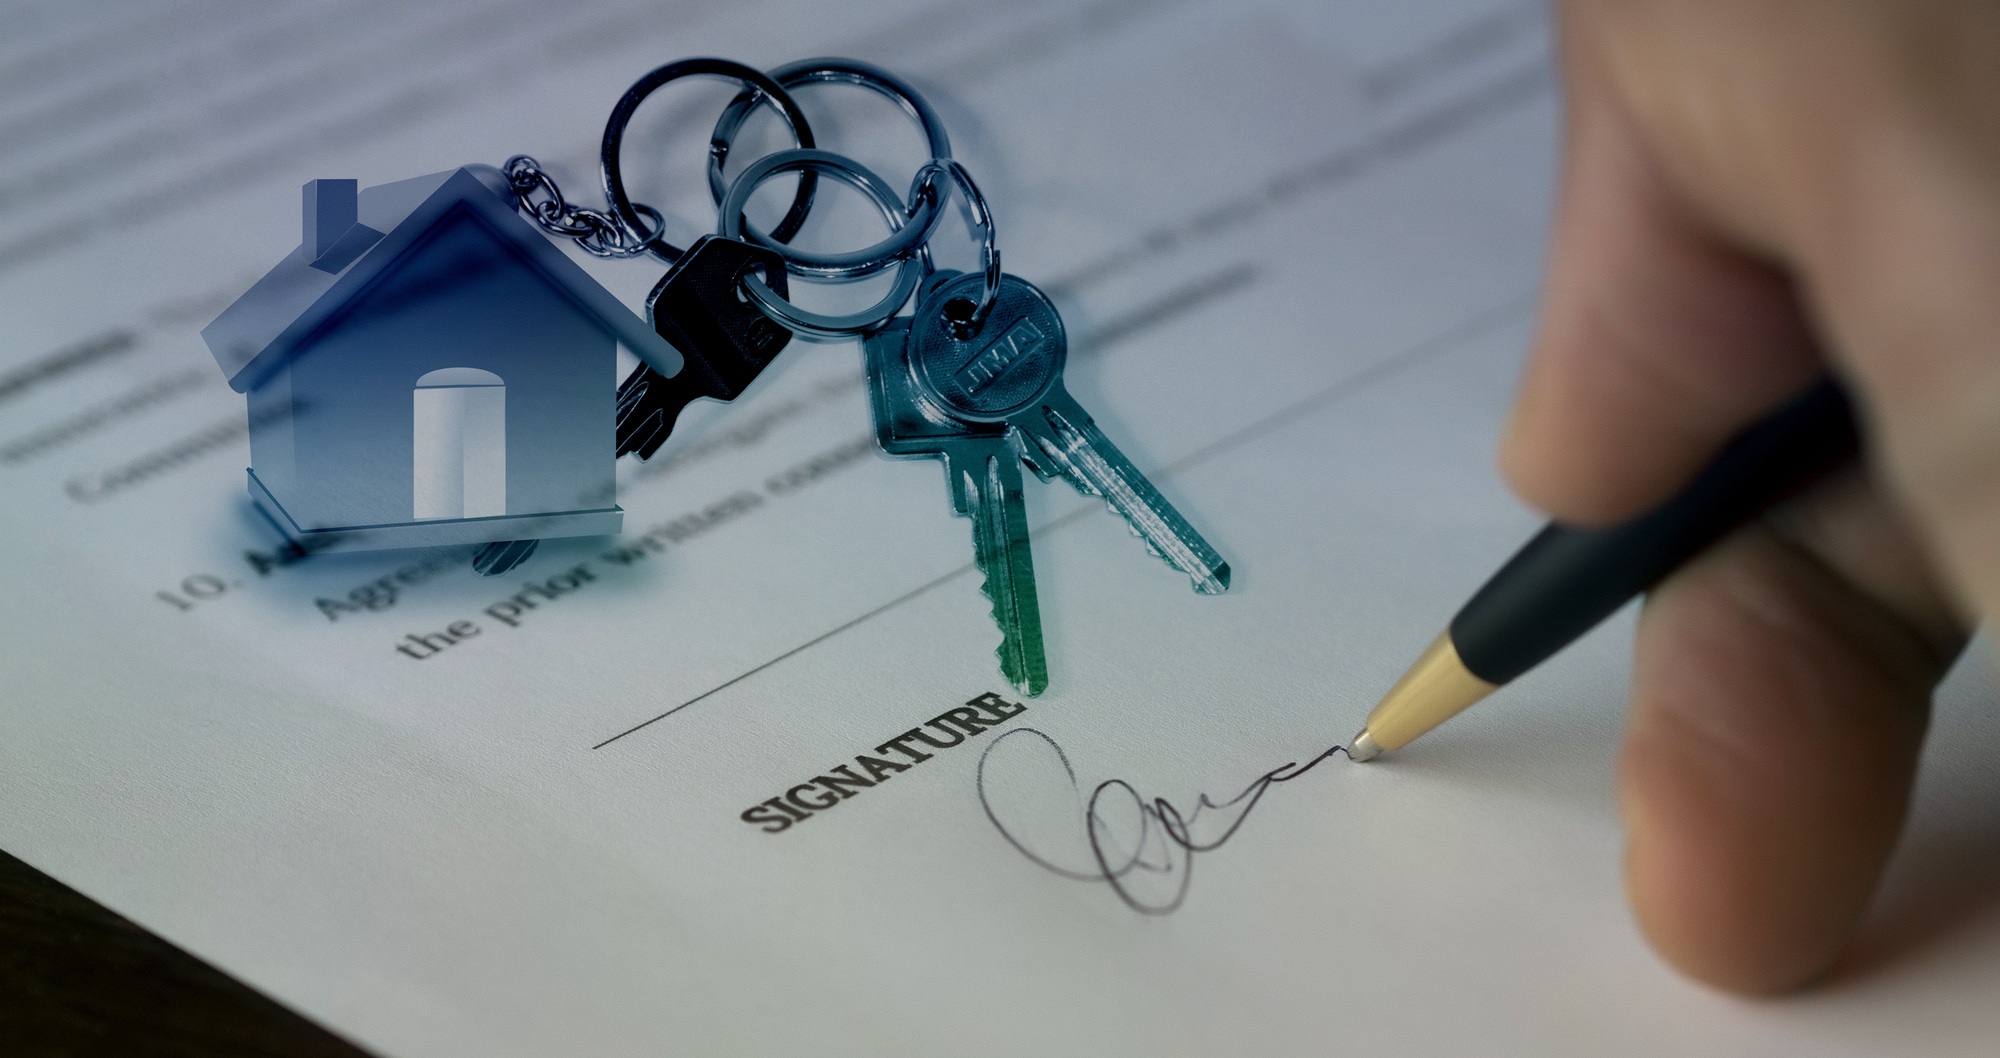 A Quick Landlord's Guide to Tenant Screening